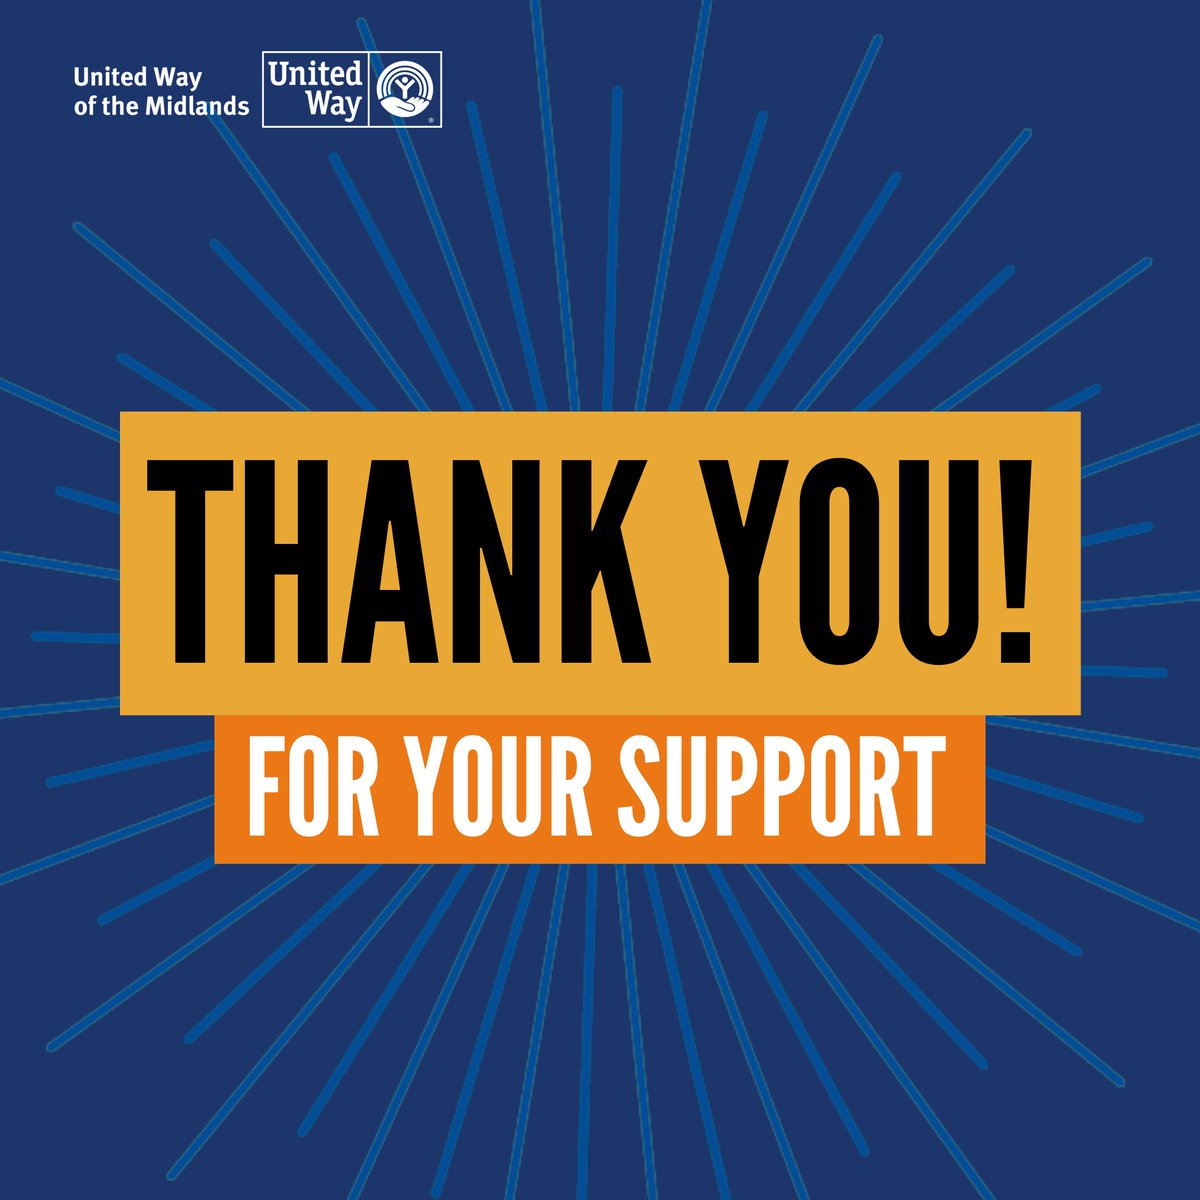 Thank you to everyone who donated or helped spread the word about our fundraiser for the Midlands Reading Consortium. Because of you, we are better equipped to mobilize volunteers who provide support to young readers in our communities. Learn more at uway.org/our-causes/edu…